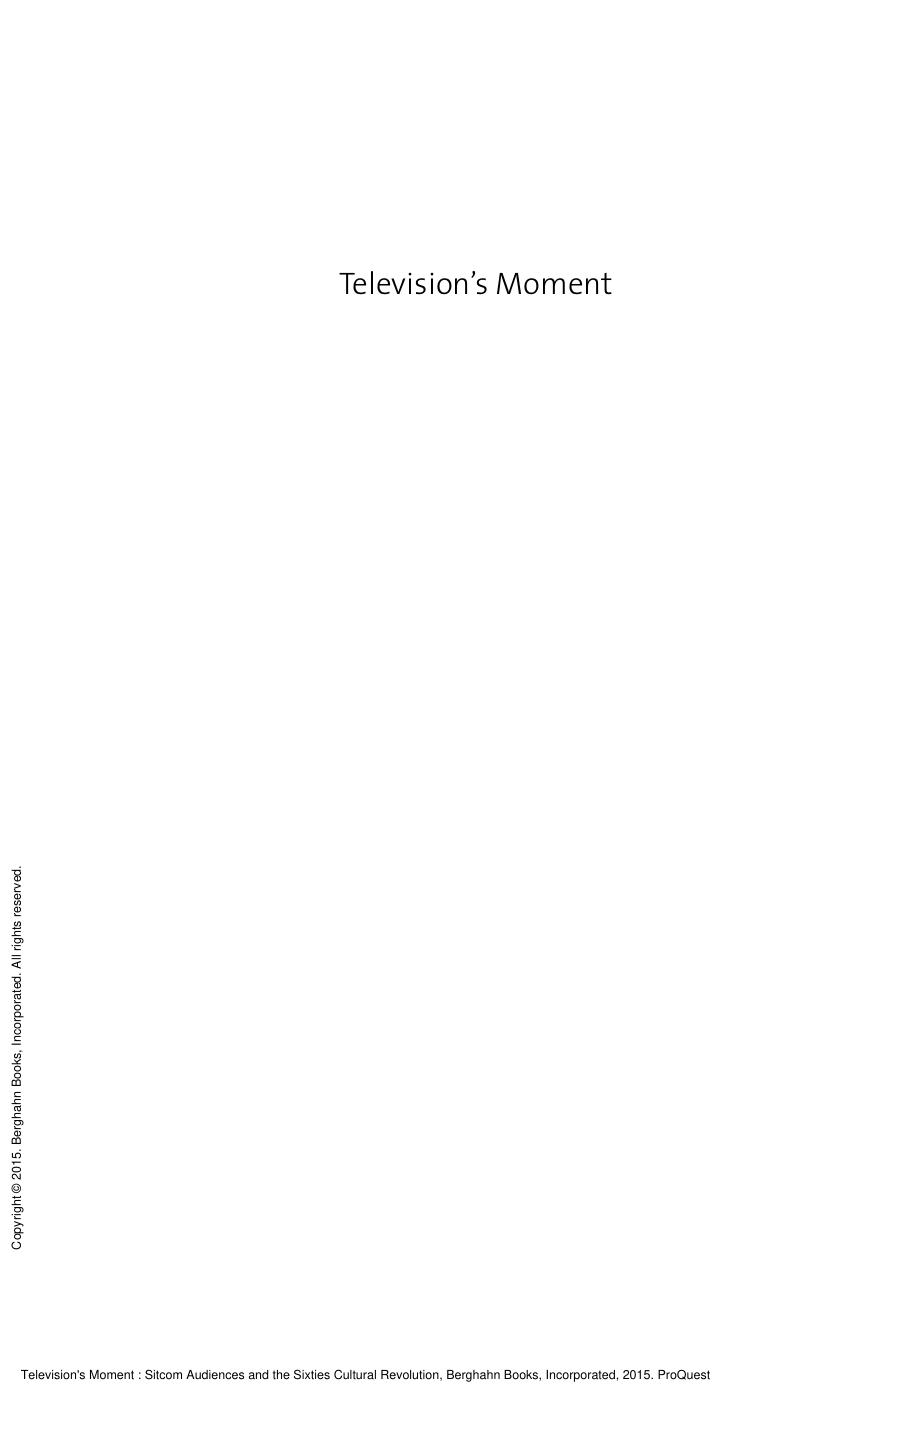 Television's Moment : Sitcom Audiences and the Sixties Cultural Revolution by Christina Von Hodenberg